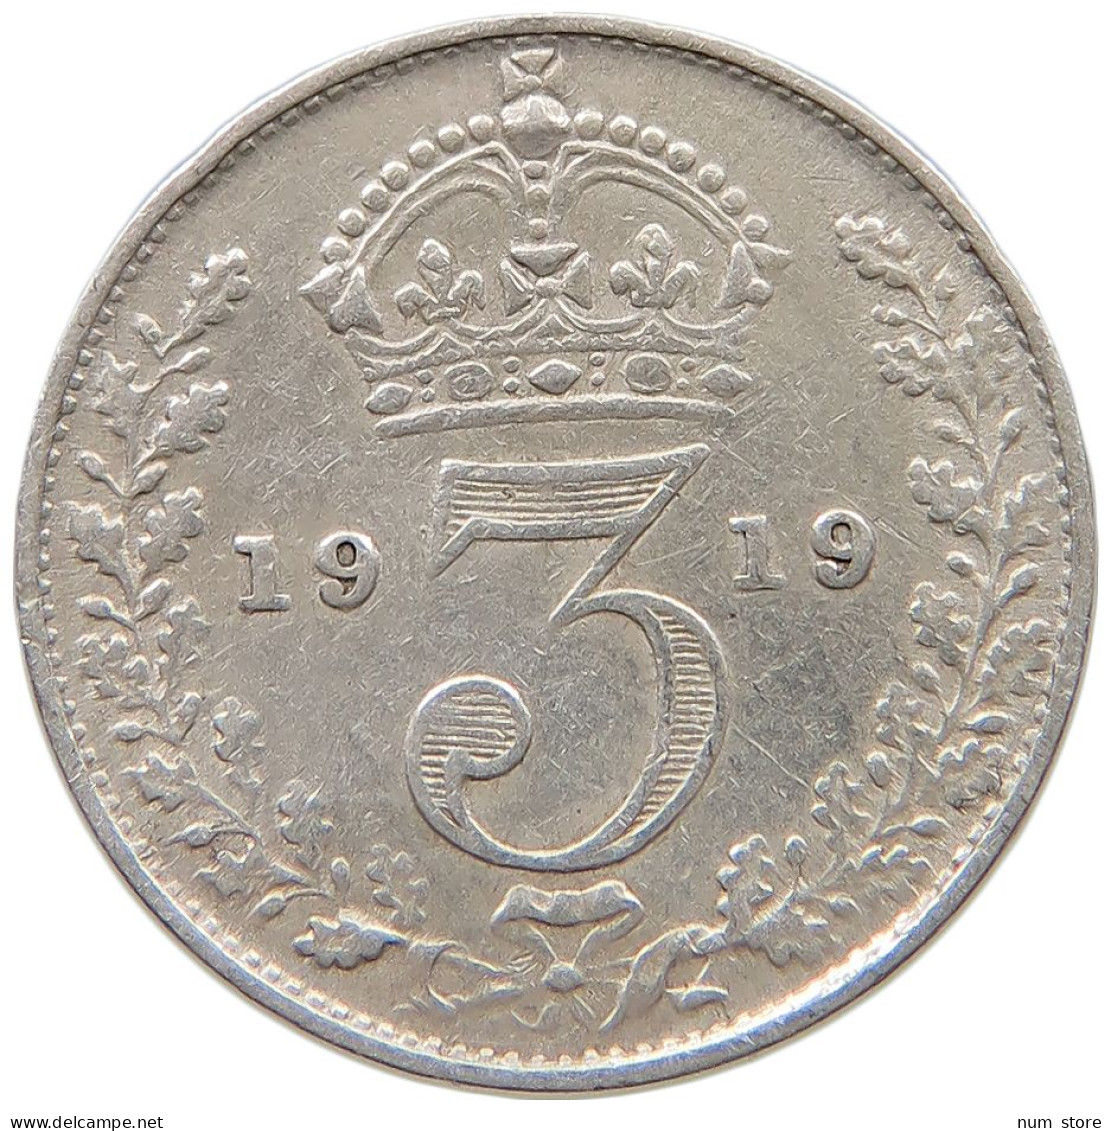 GREAT BRITAIN THREEPENCE 1919 #s059 0555 - F. 3 Pence